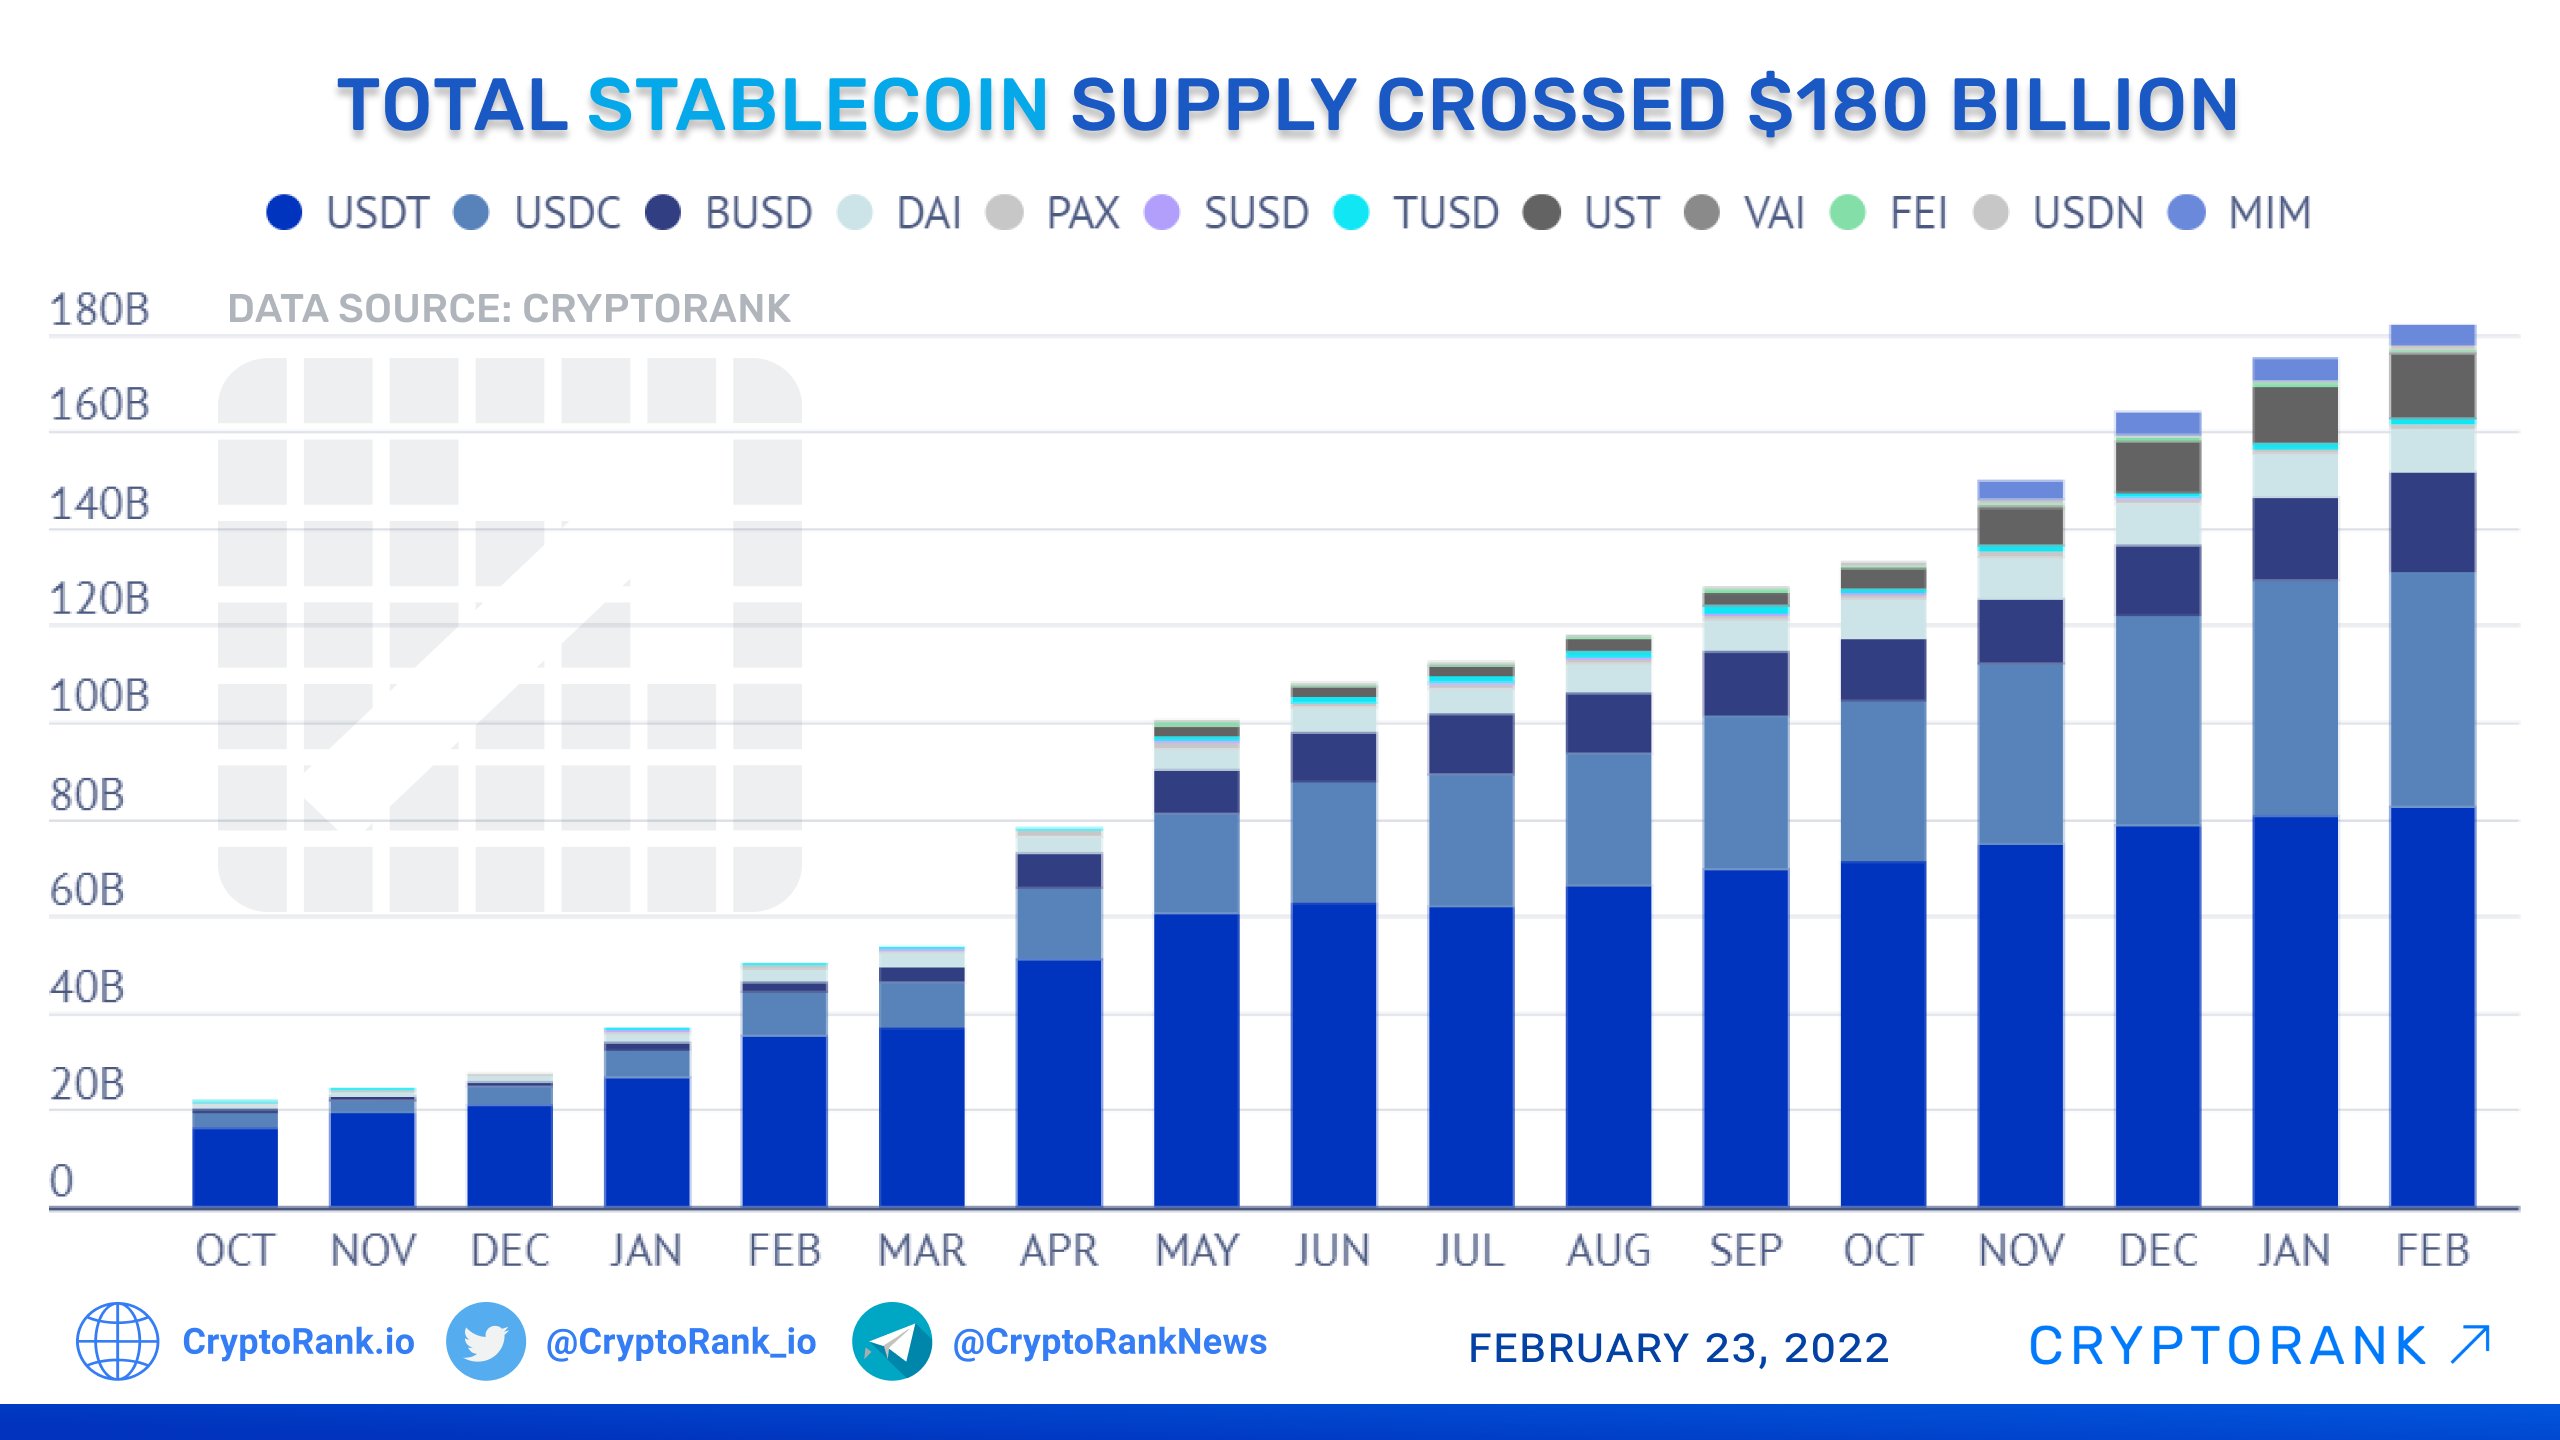 The total value of stablecoins reached $180 billion